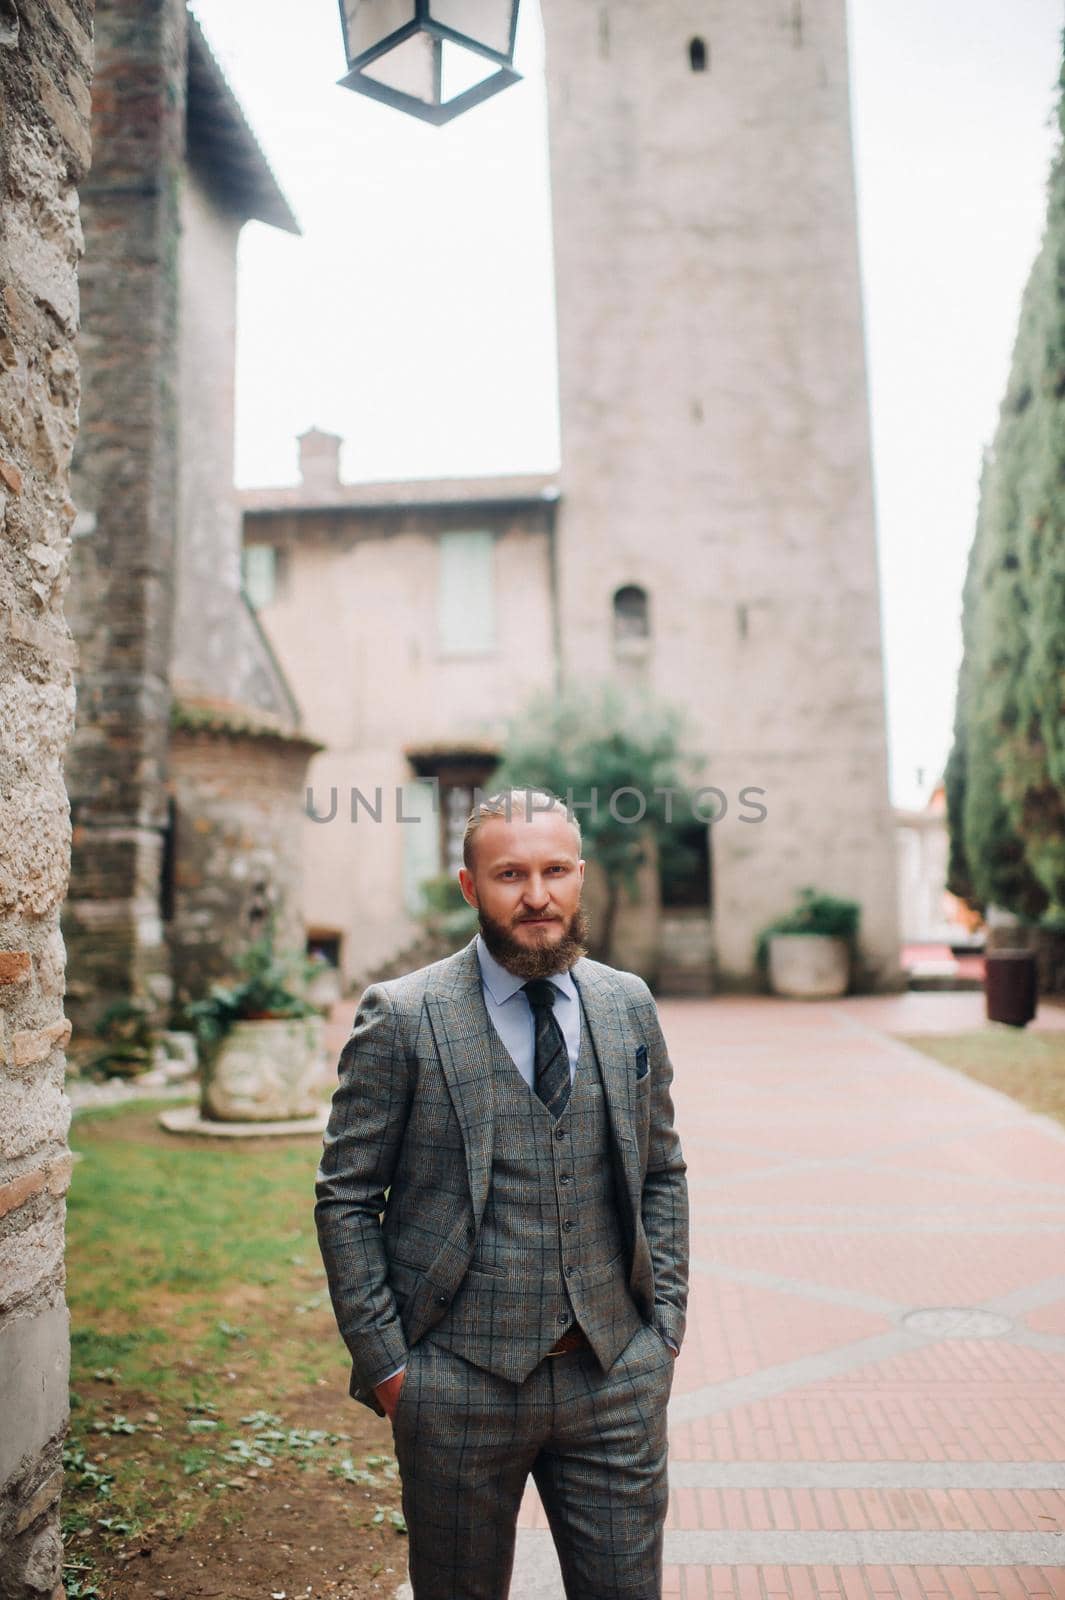 A man with a beard in a strict grey three-piece suit with a tie in the old town of Sirmione, a Stylish man in a grey suit in Italy by Lobachad